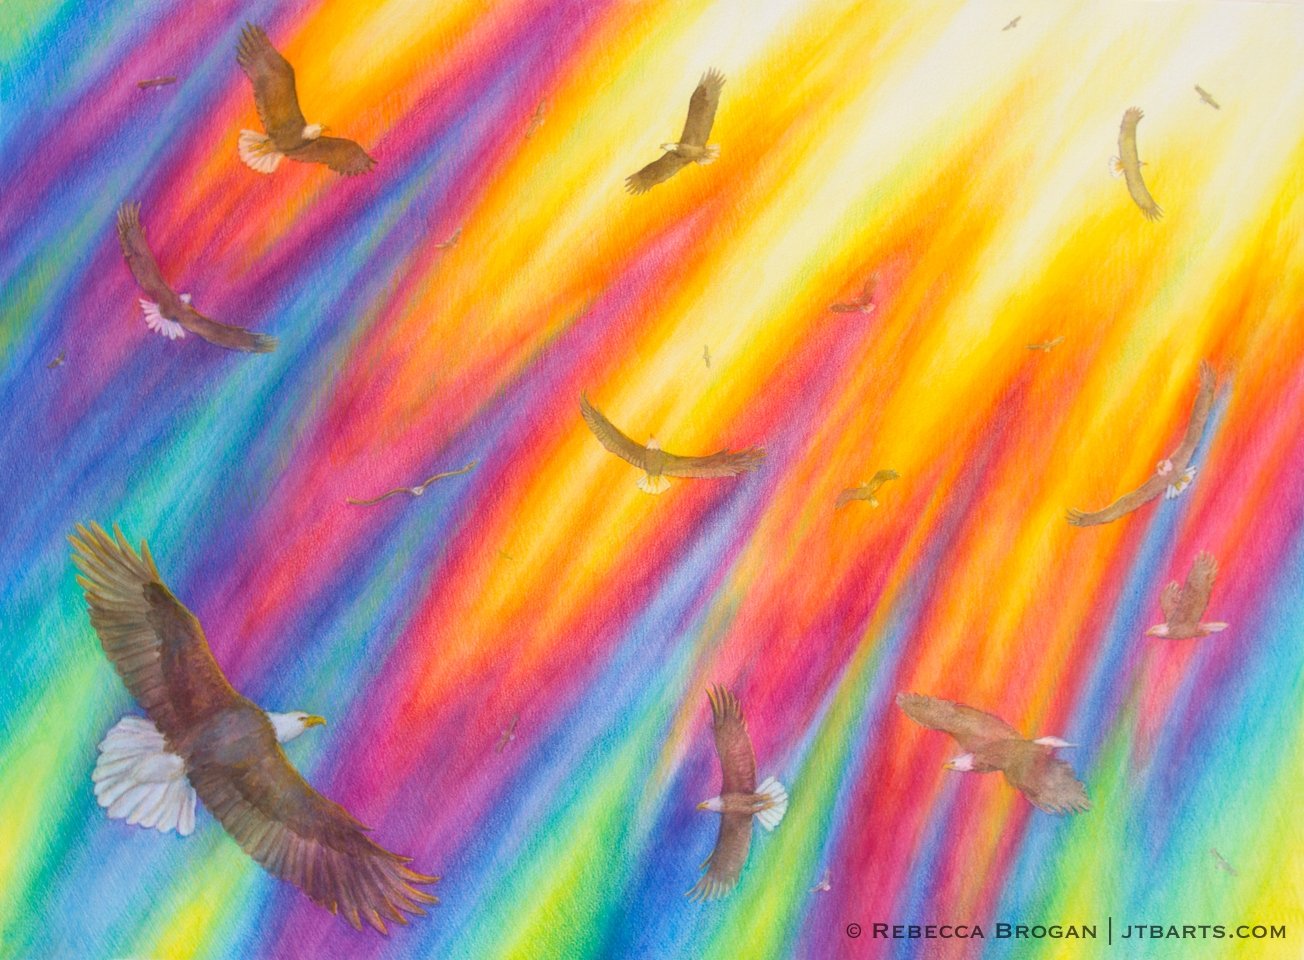 Eagles soaring in God's presence with a rainbow around his throne. Prophetic Christian artwork.